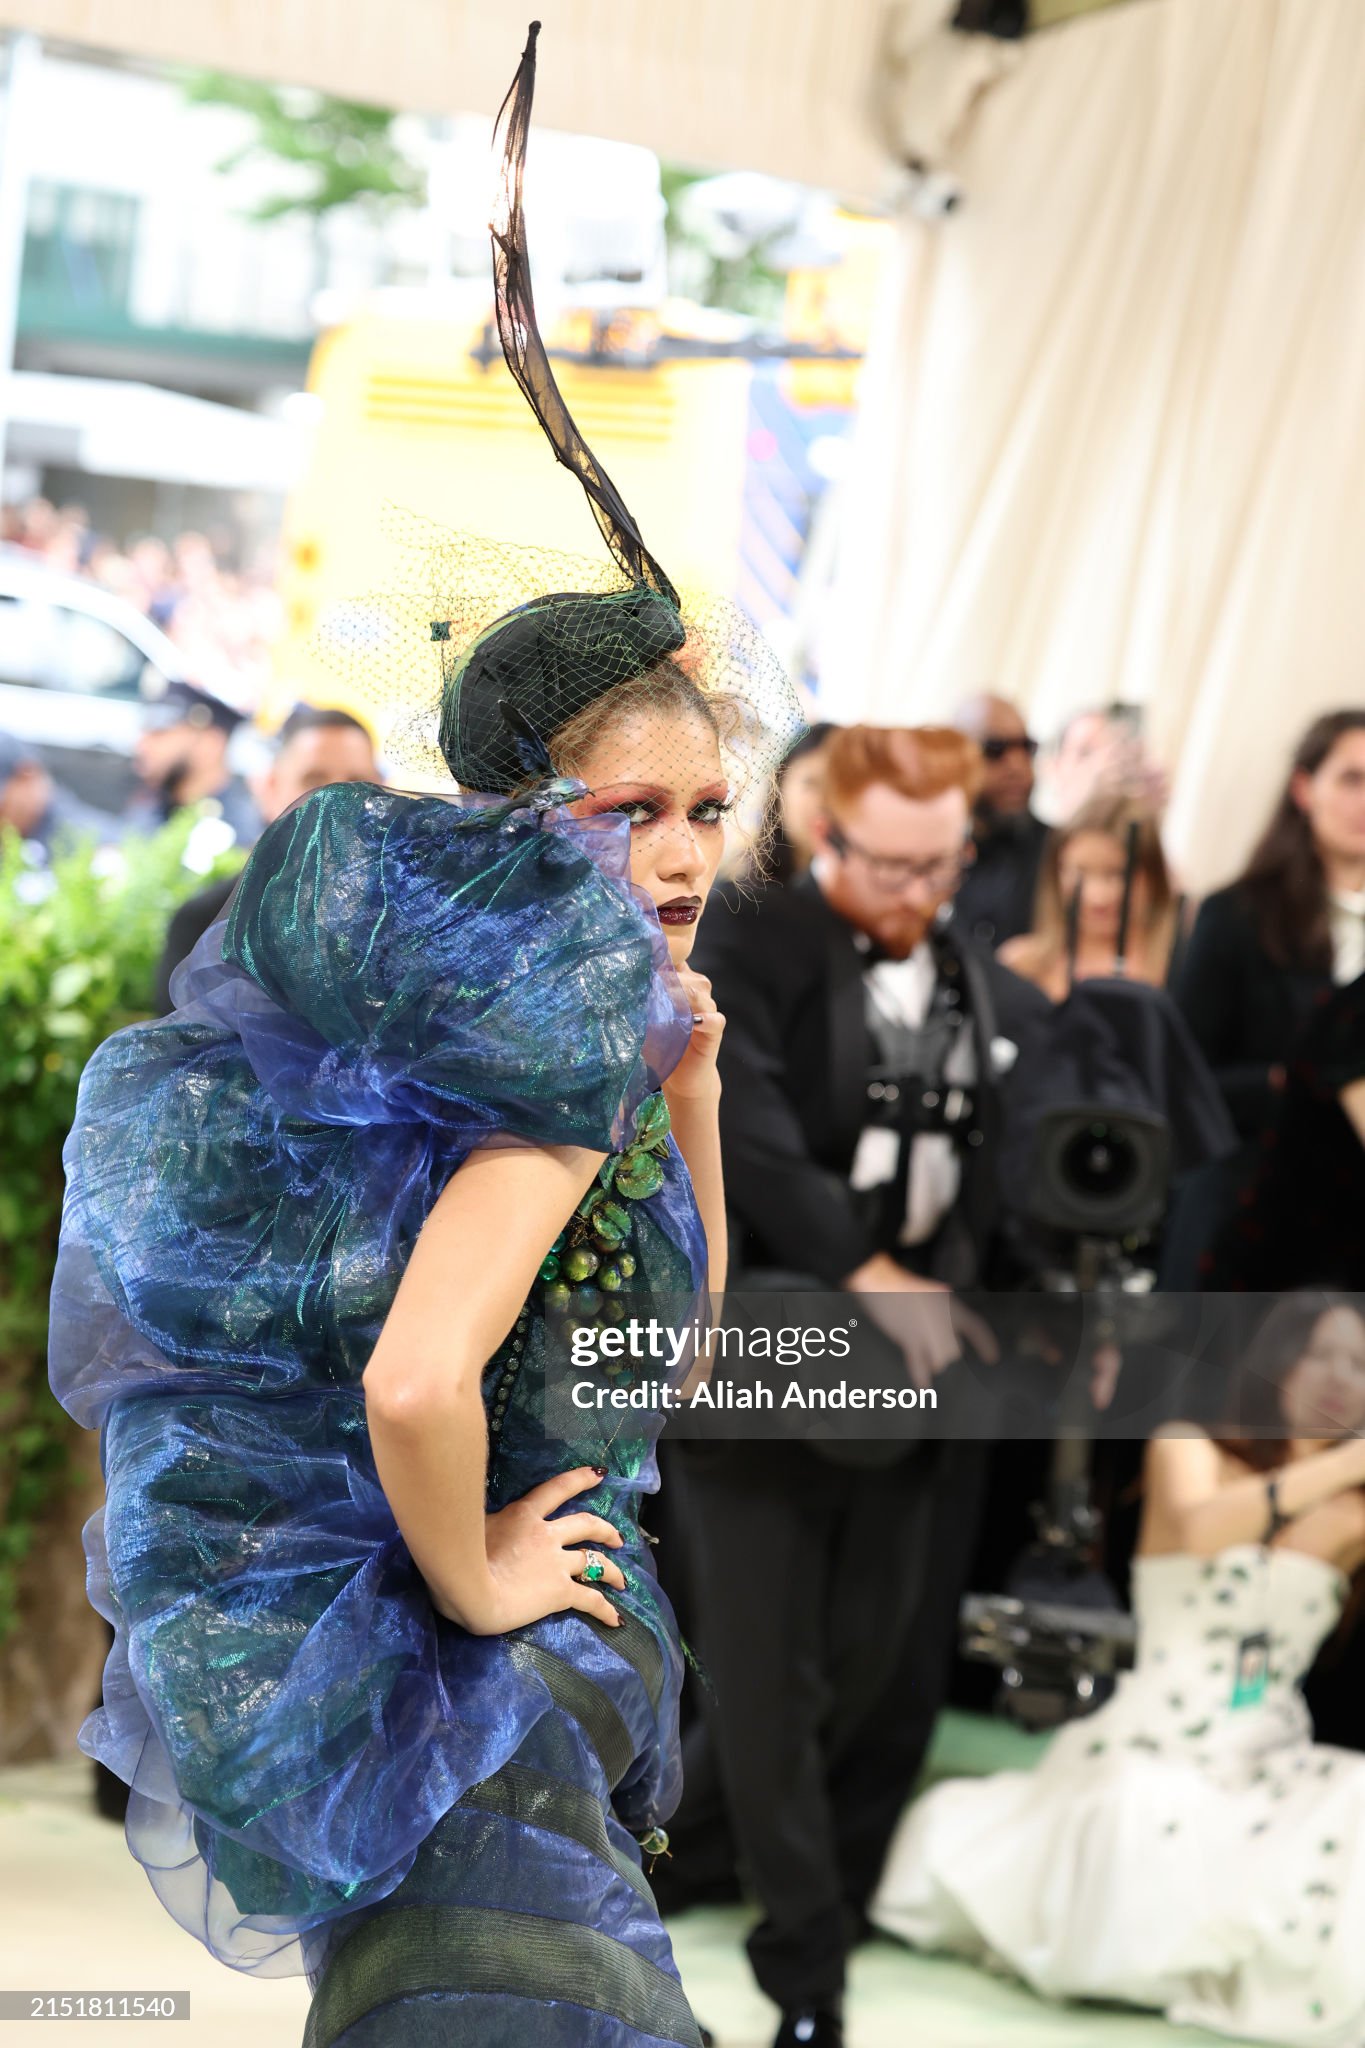 gettyimages-2151811540-2048x2048.jpg